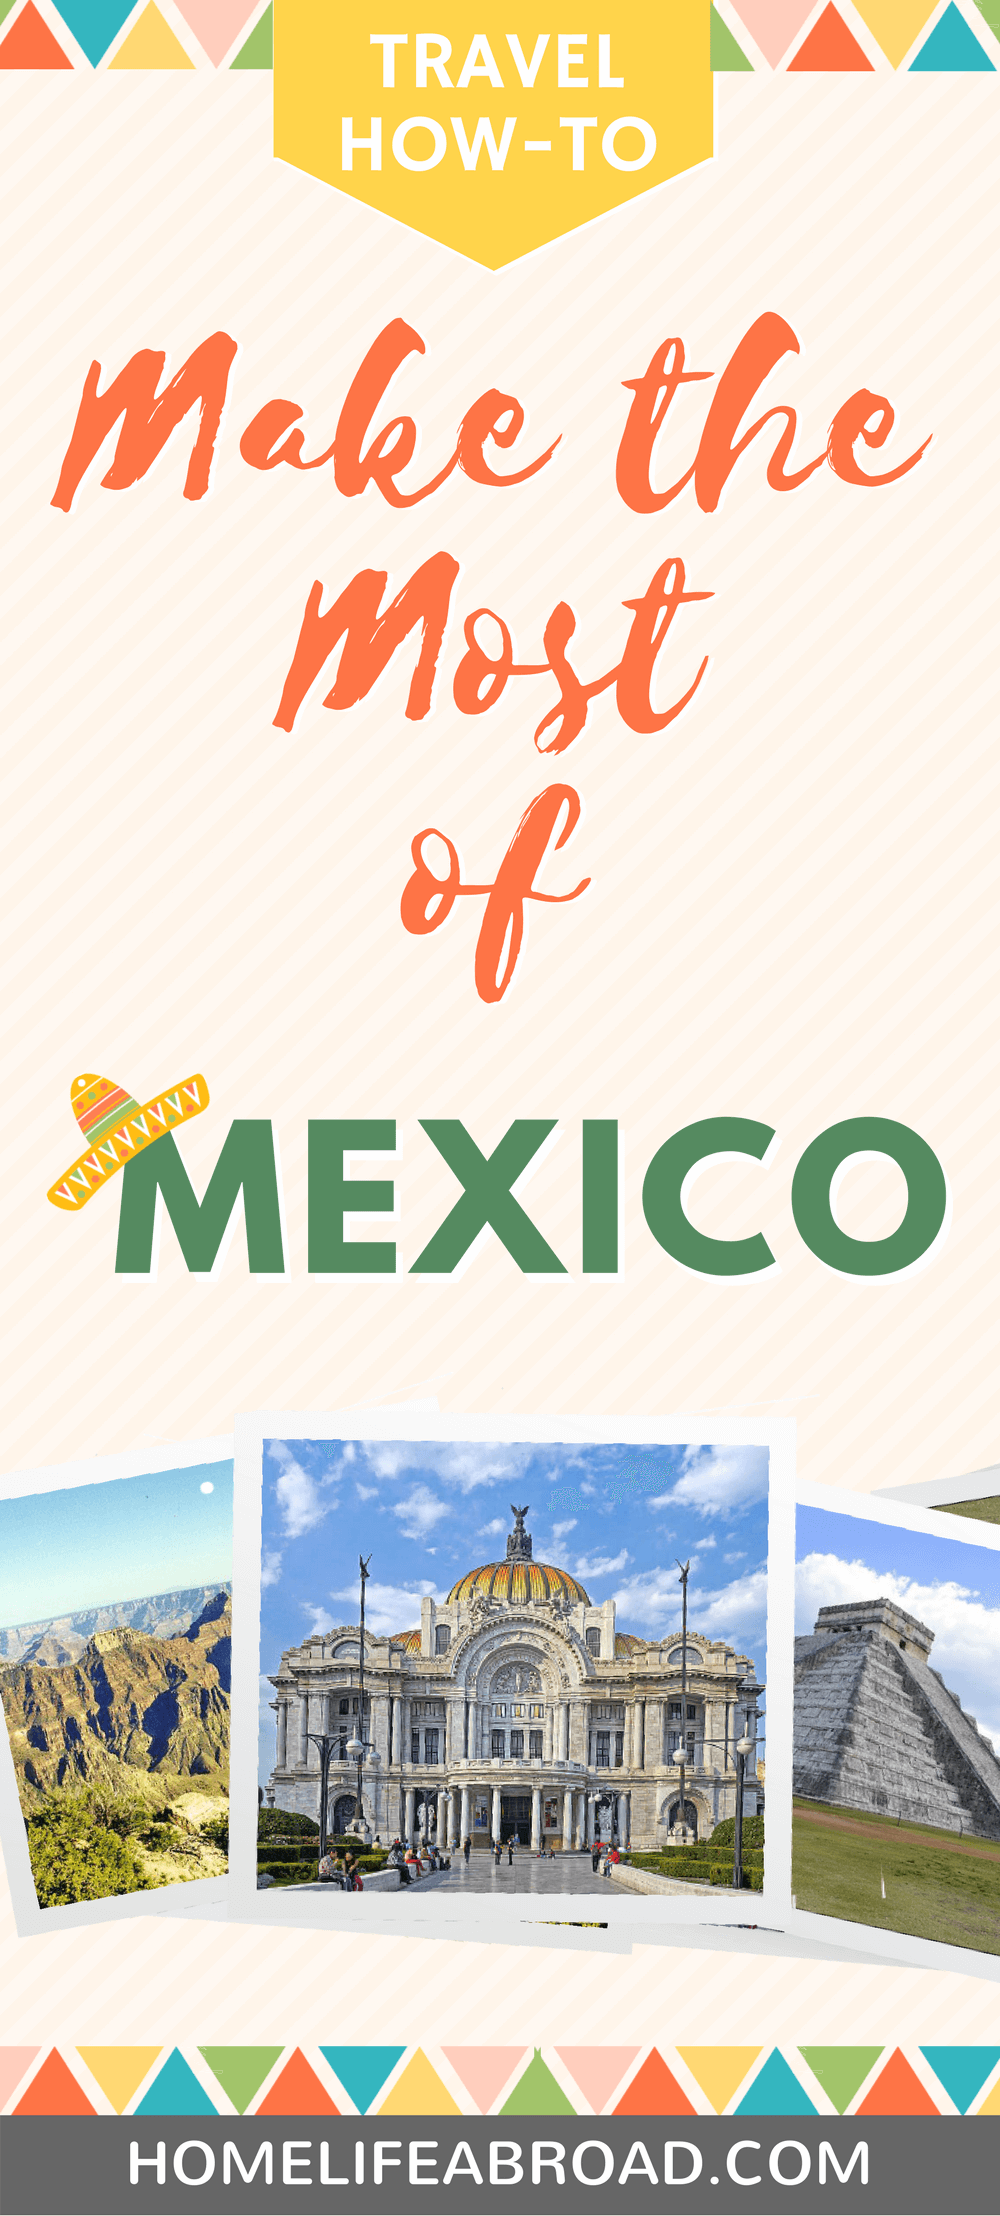 Mexico is so much more than a Spring Break in Cancun. If you're planning to travel there, check out 4 ways to make the most of your trip! #mexico #travel #tourism #vacation